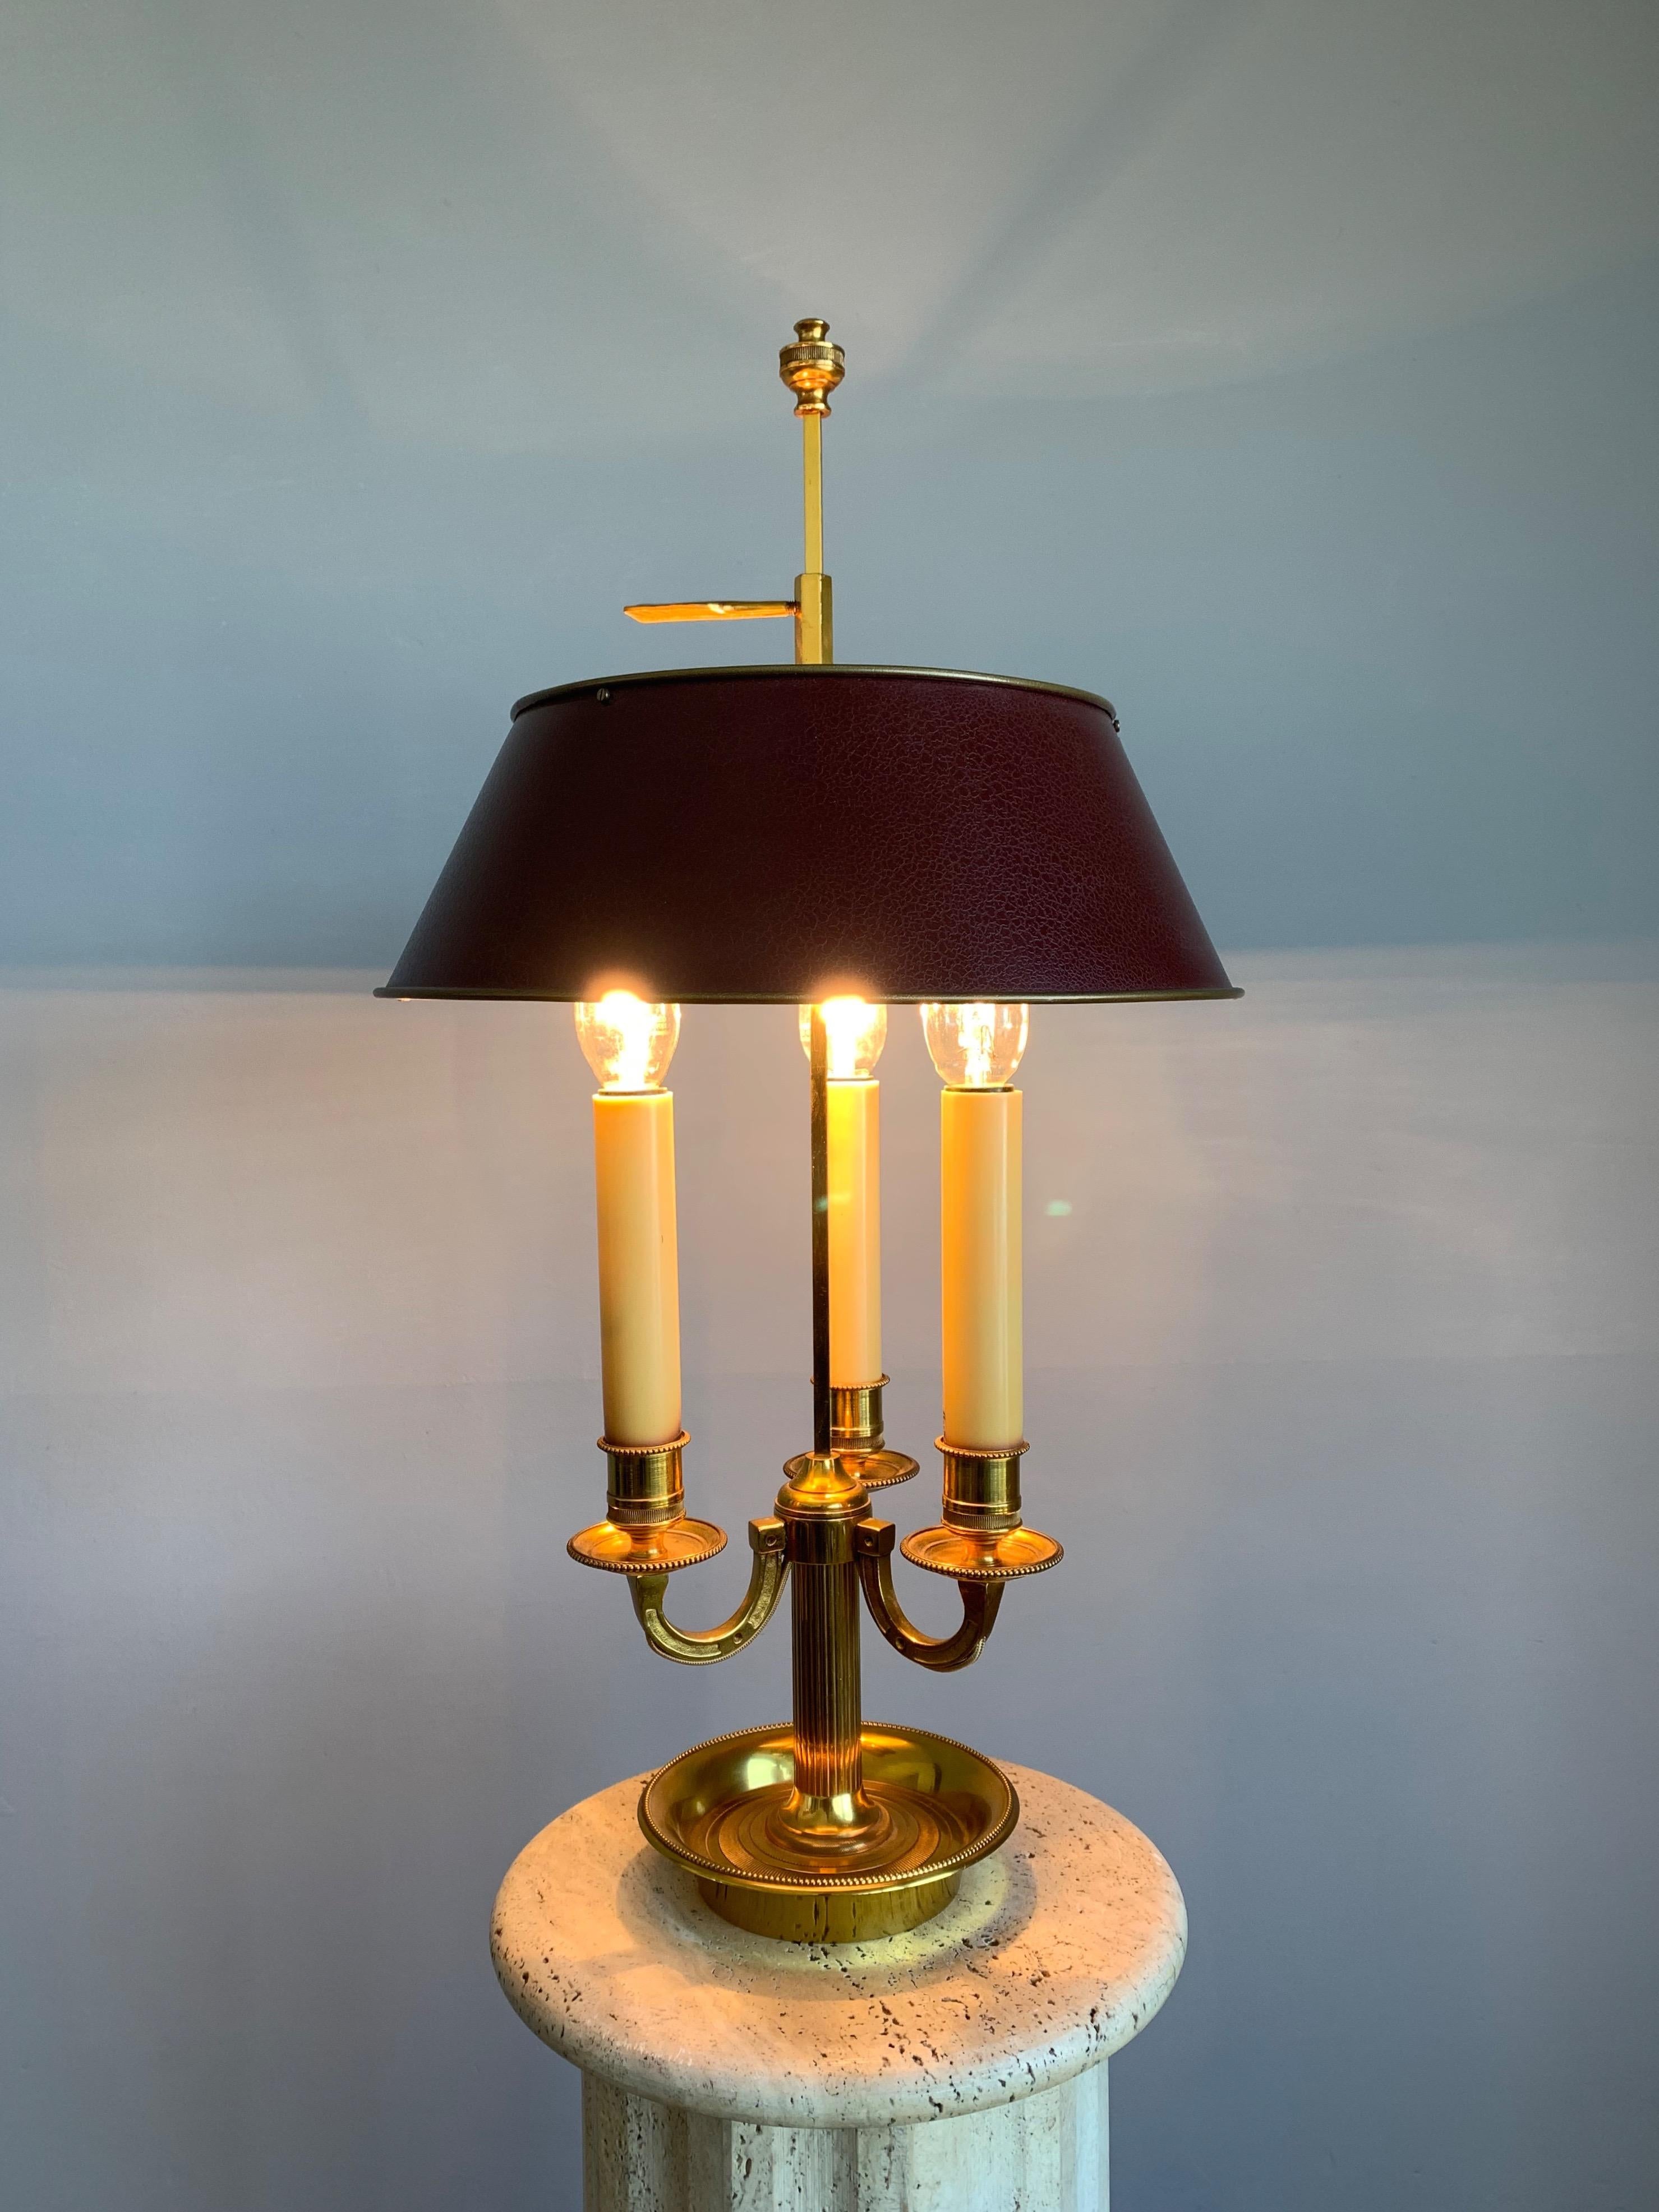 Stylish and mint condition Empire Revival table lamp. 

This 1970s table lamp was created in Paris, France and it is perfect for bringing warm light and a good atmosphere to your home or office interior. The beautifully shaped, metal lamp shade is